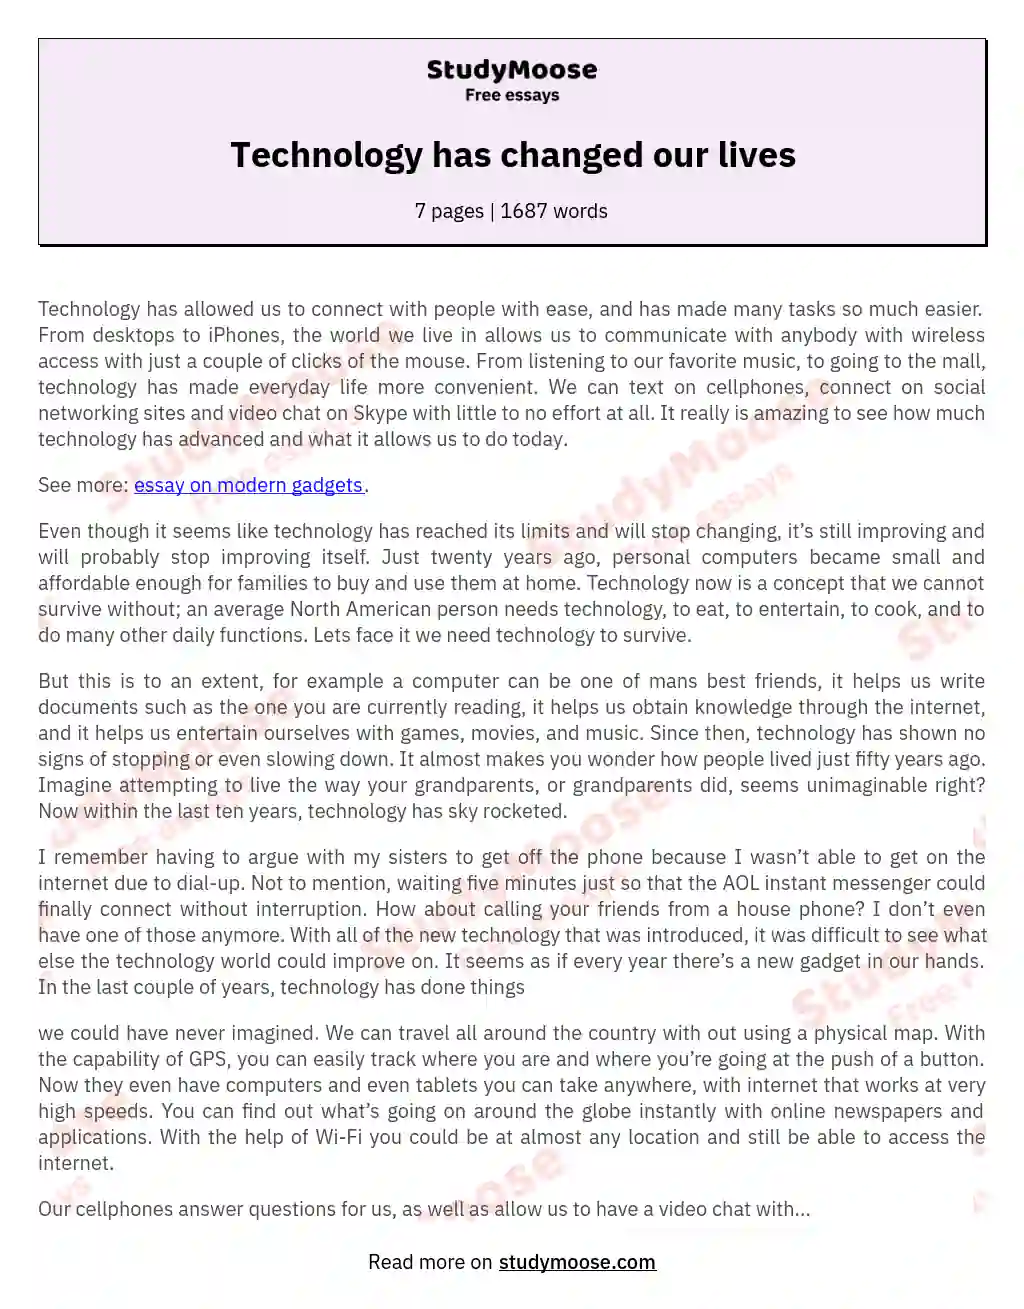 Technology has changed our lives essay